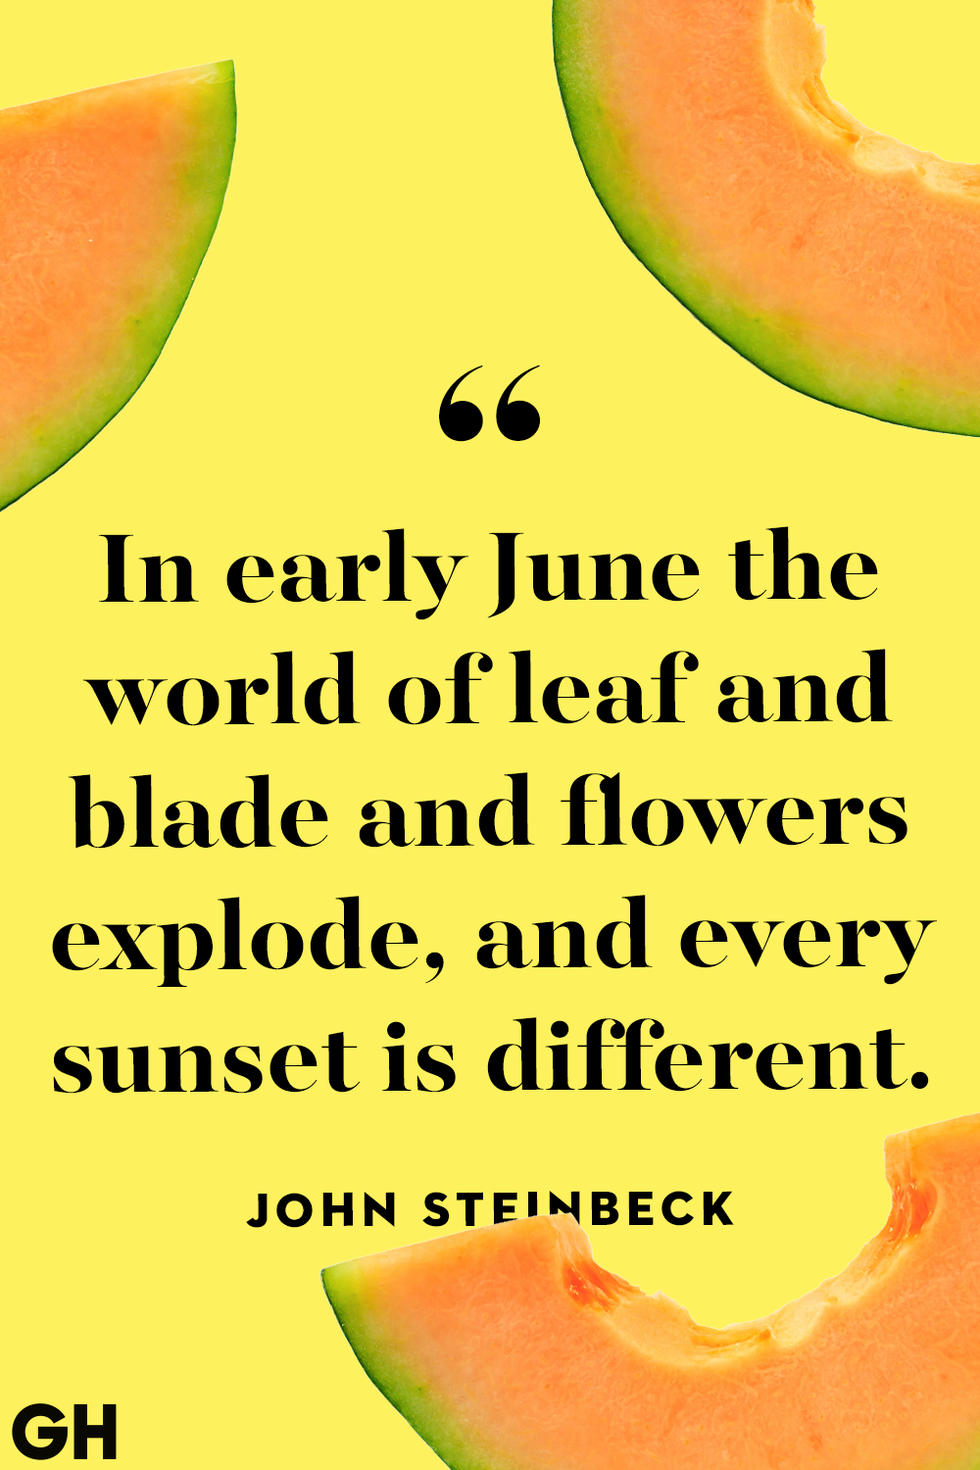 summer quote by john steinbeck